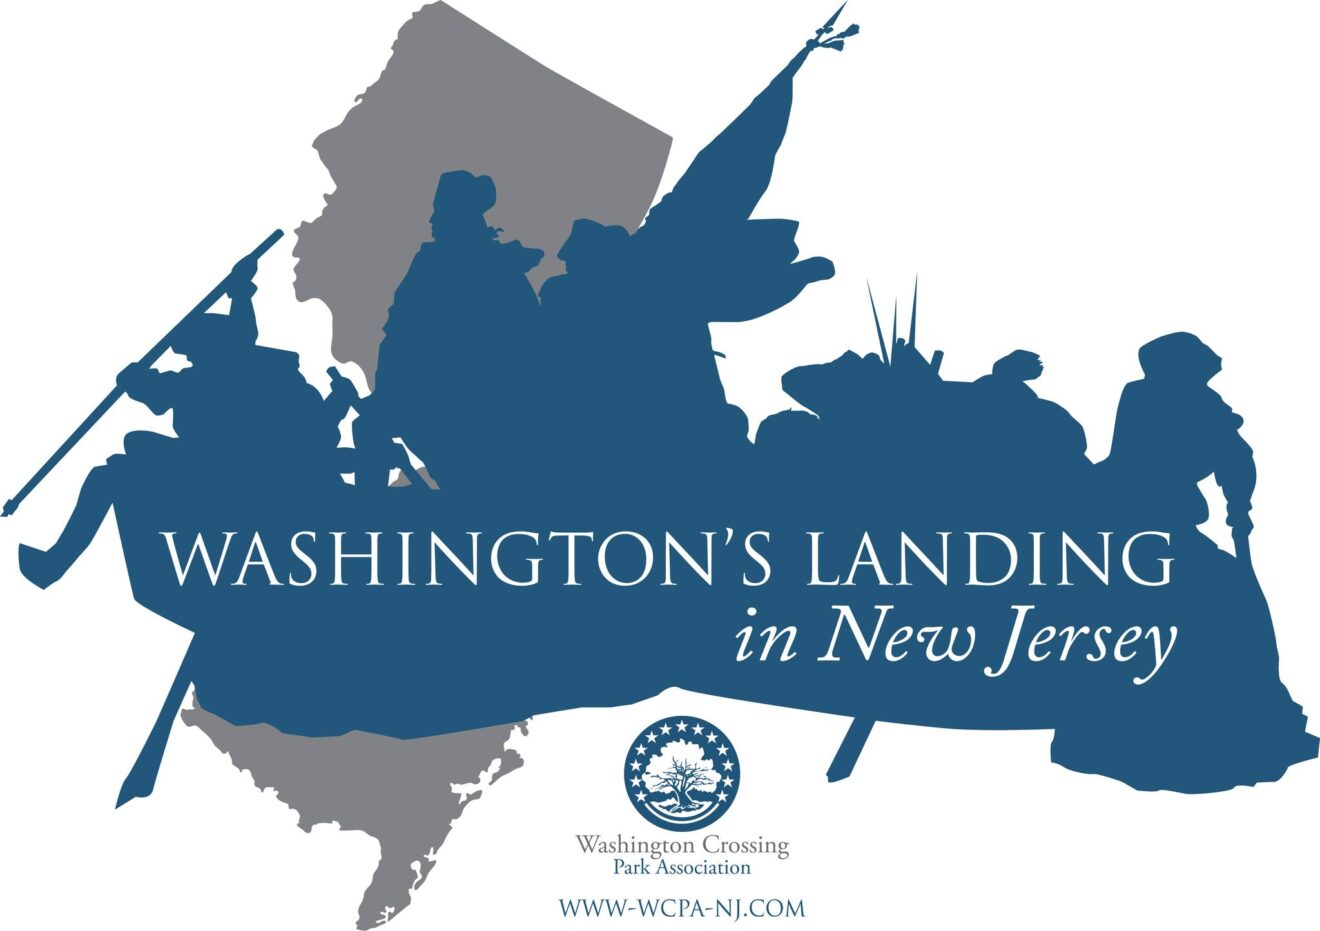 ‘Washington’s Landing in New Jersey’ Event Brings History to Life